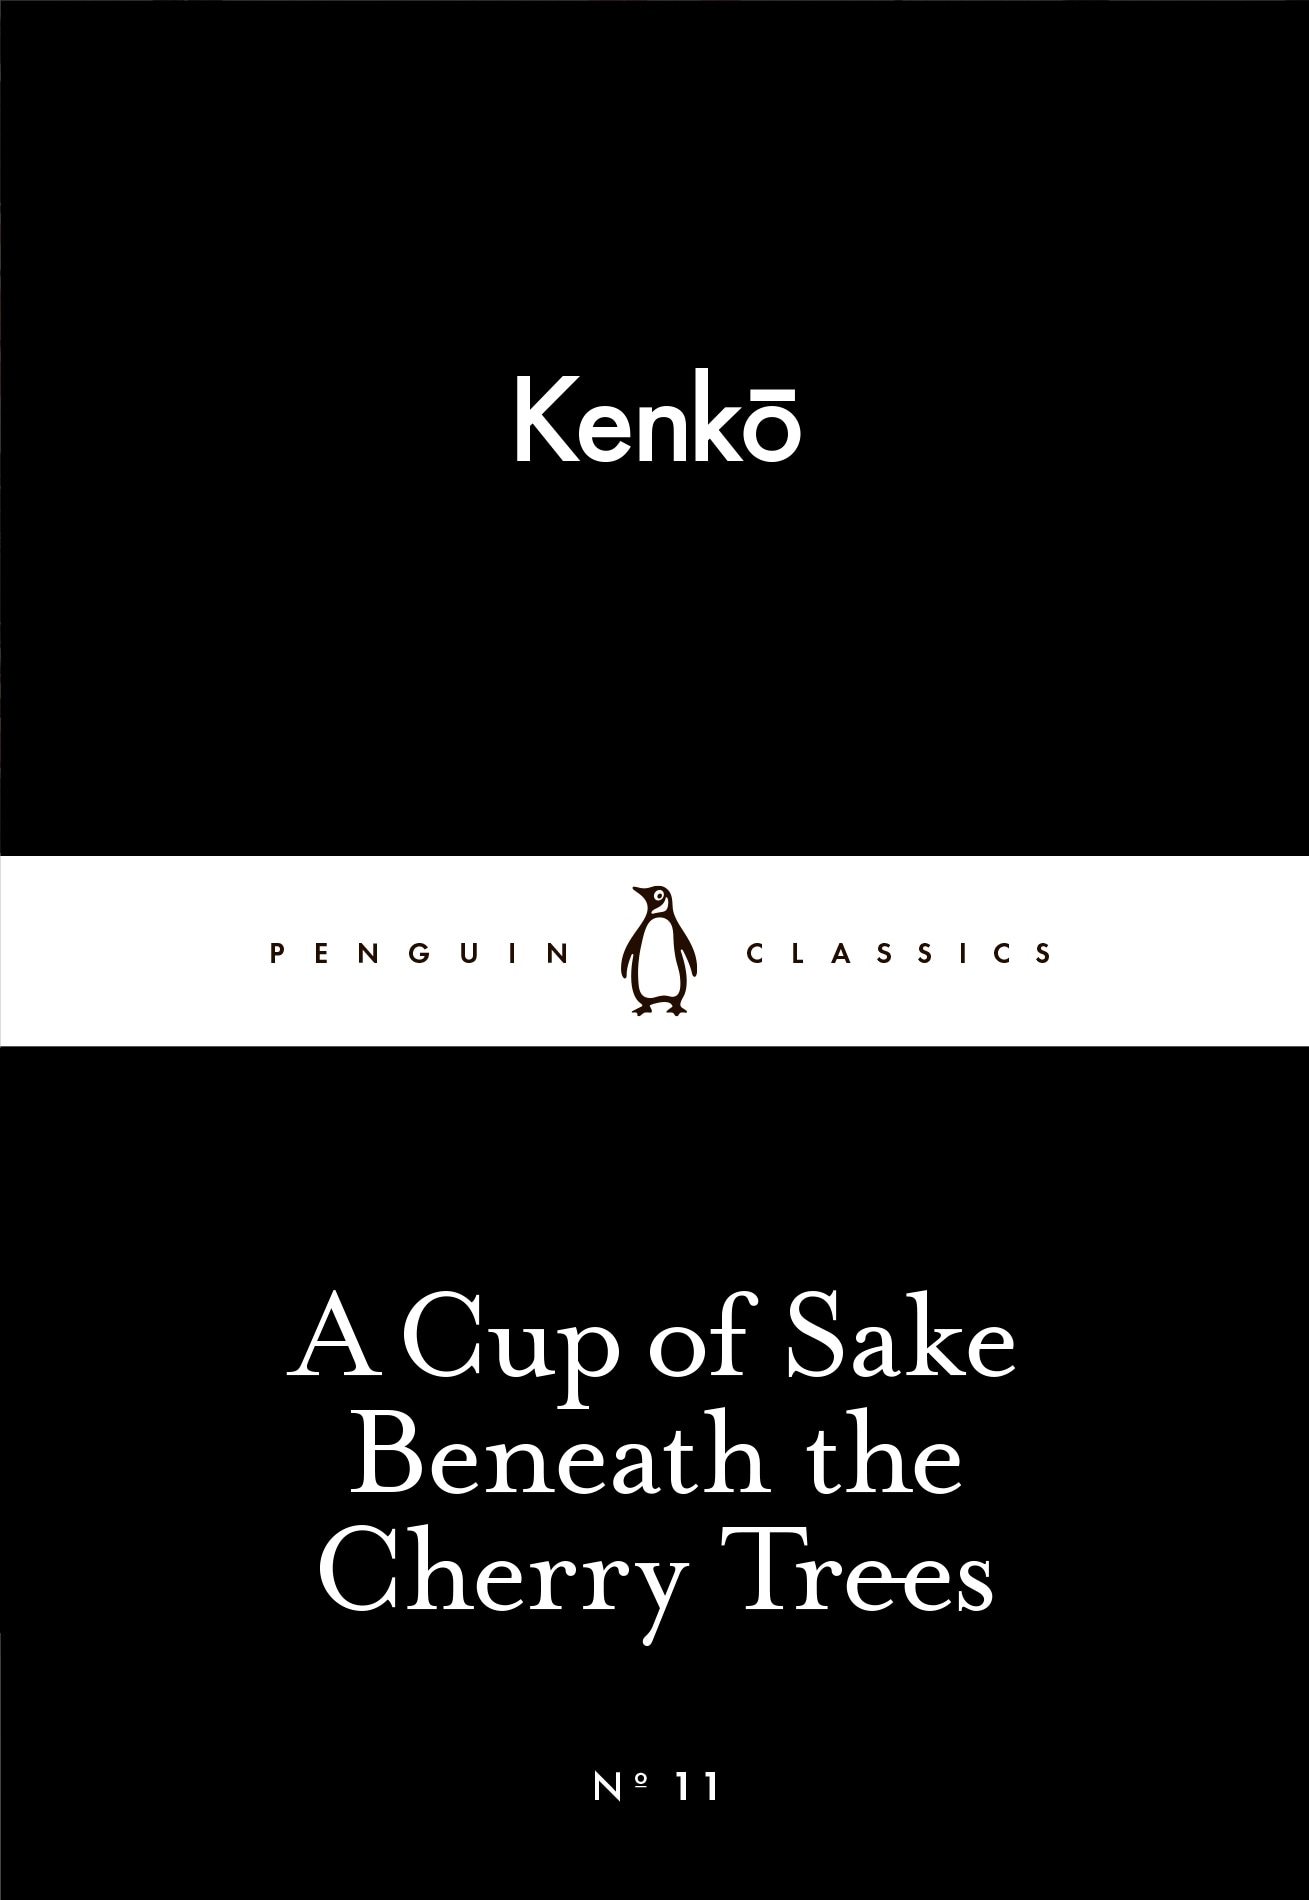 Book “A Cup of Sake Beneath the Cherry Trees” by Kenko — February 26, 2015